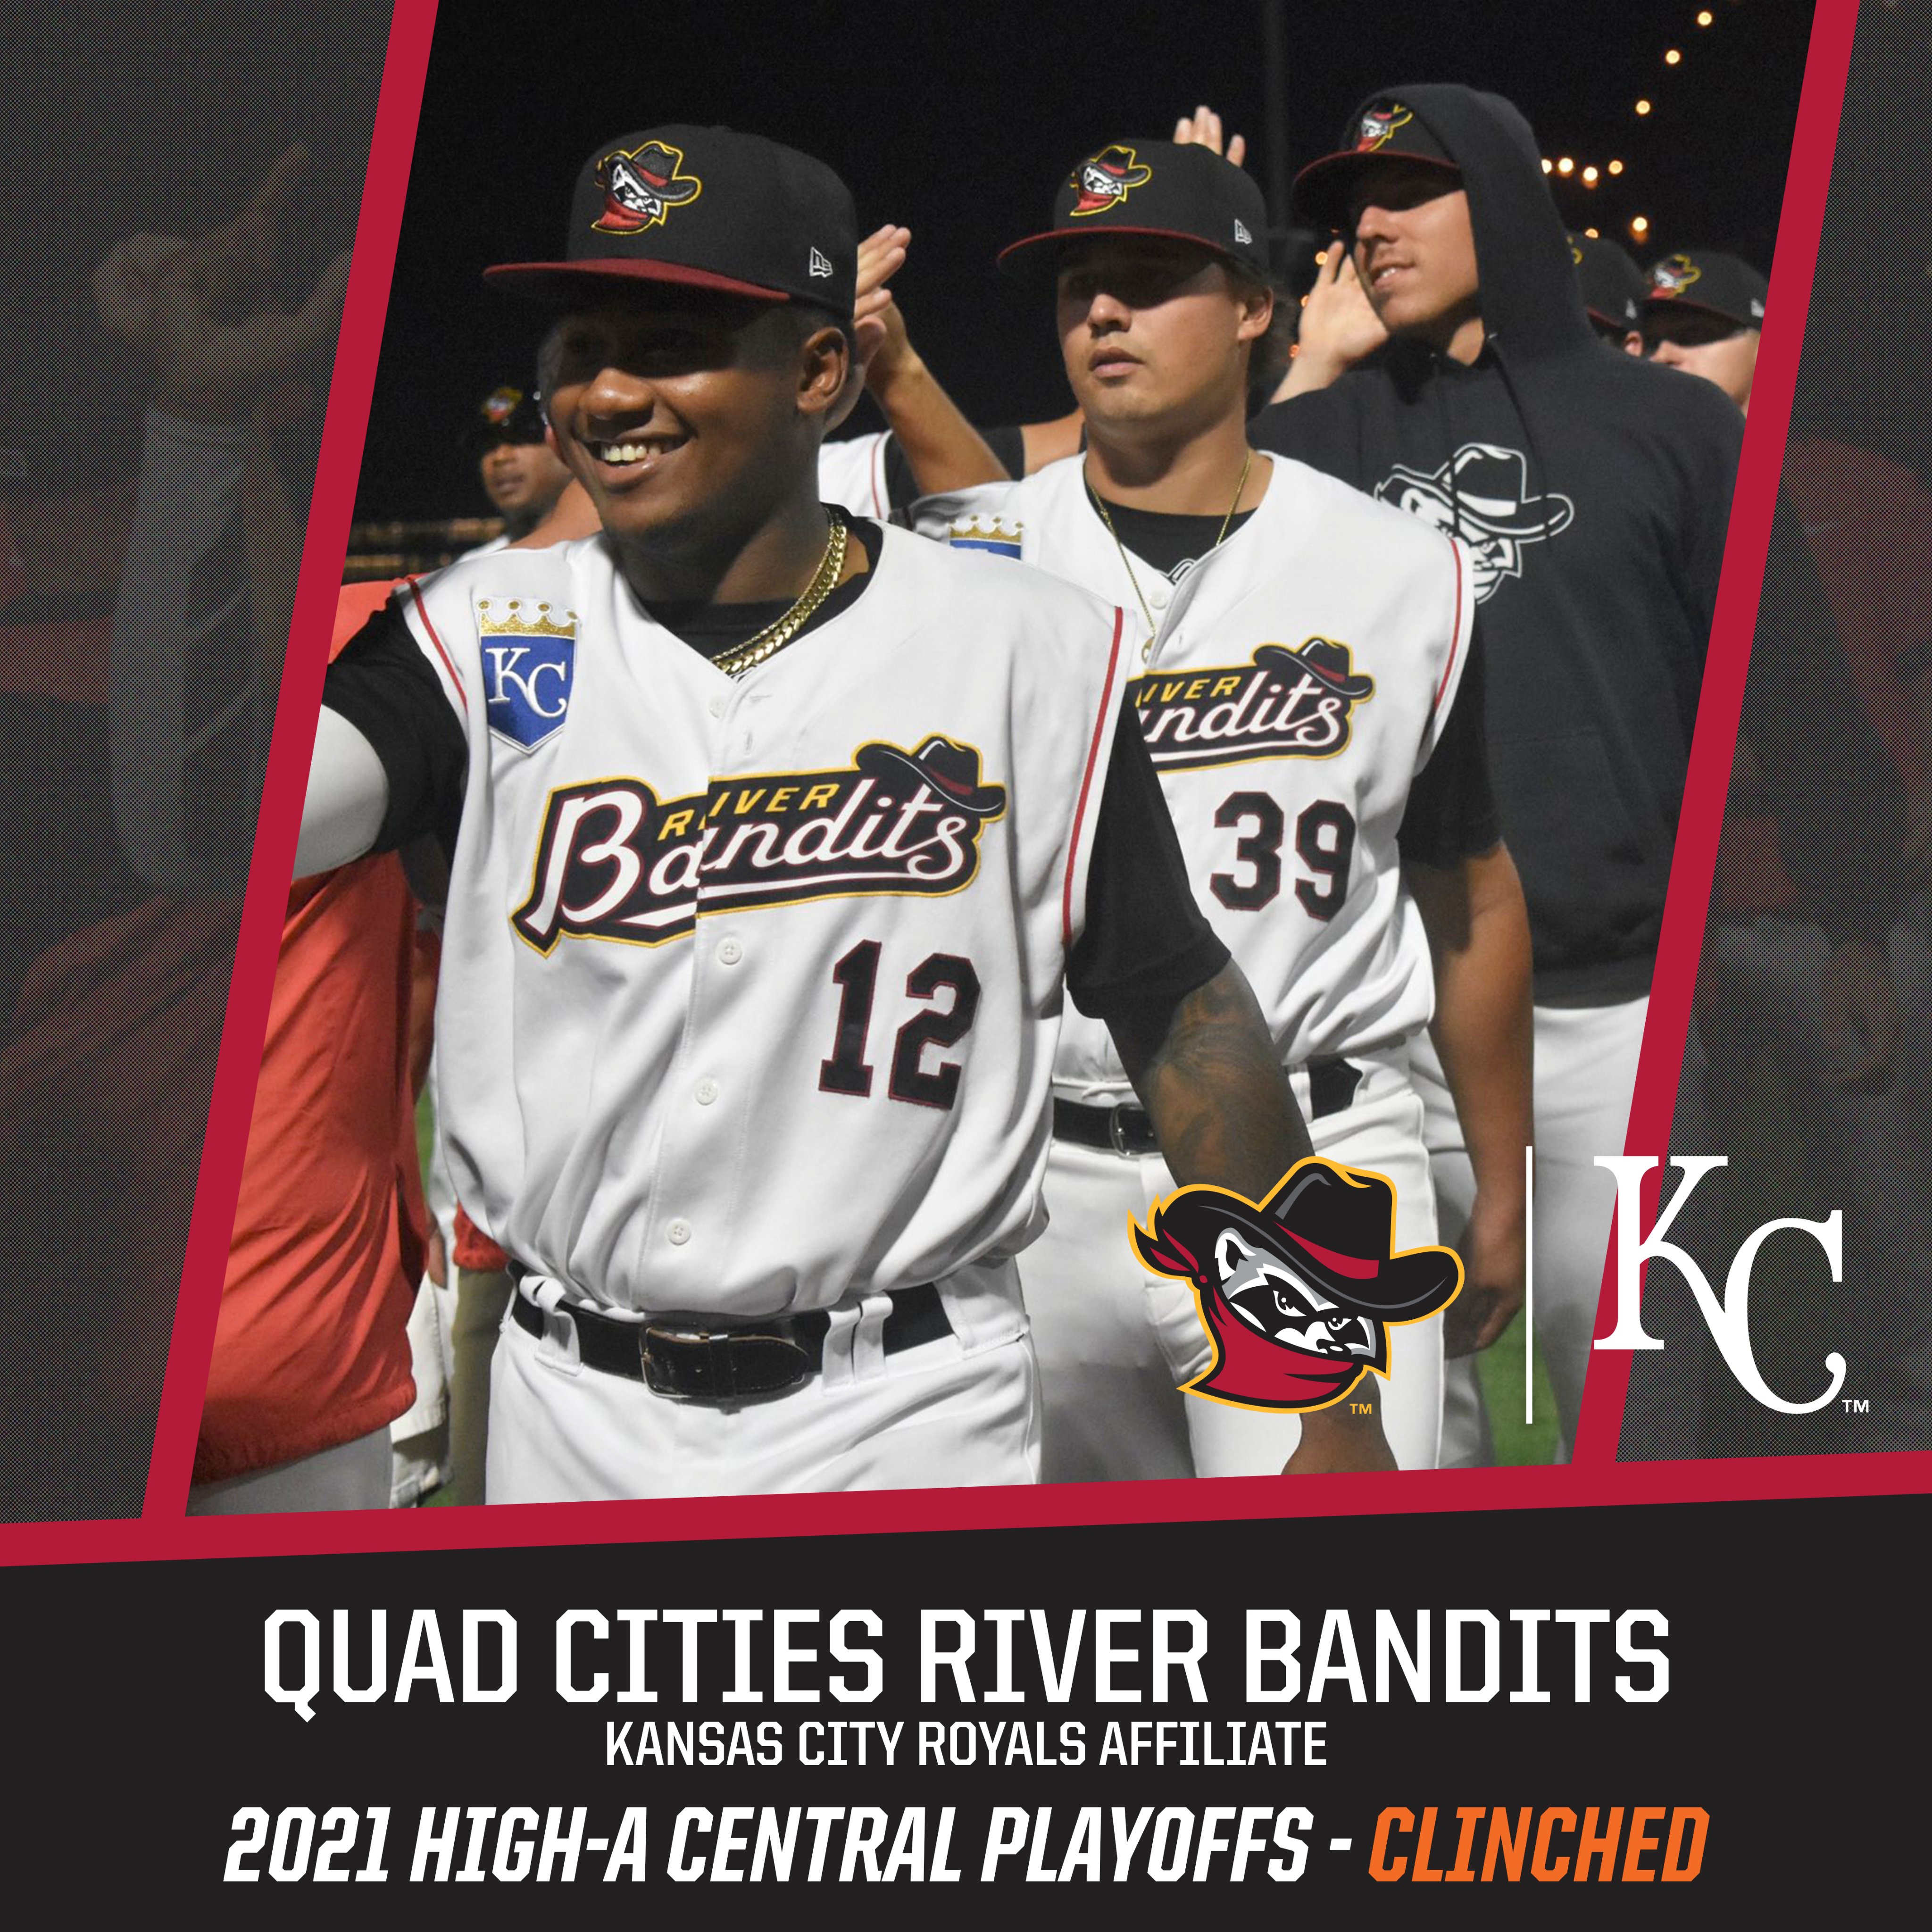 Minor League Baseball on X: The River Bandits didn't have to swipe a spot  in the playoffs. The Royals affiliate got one by winning 71 games in the  High-A Central.  /